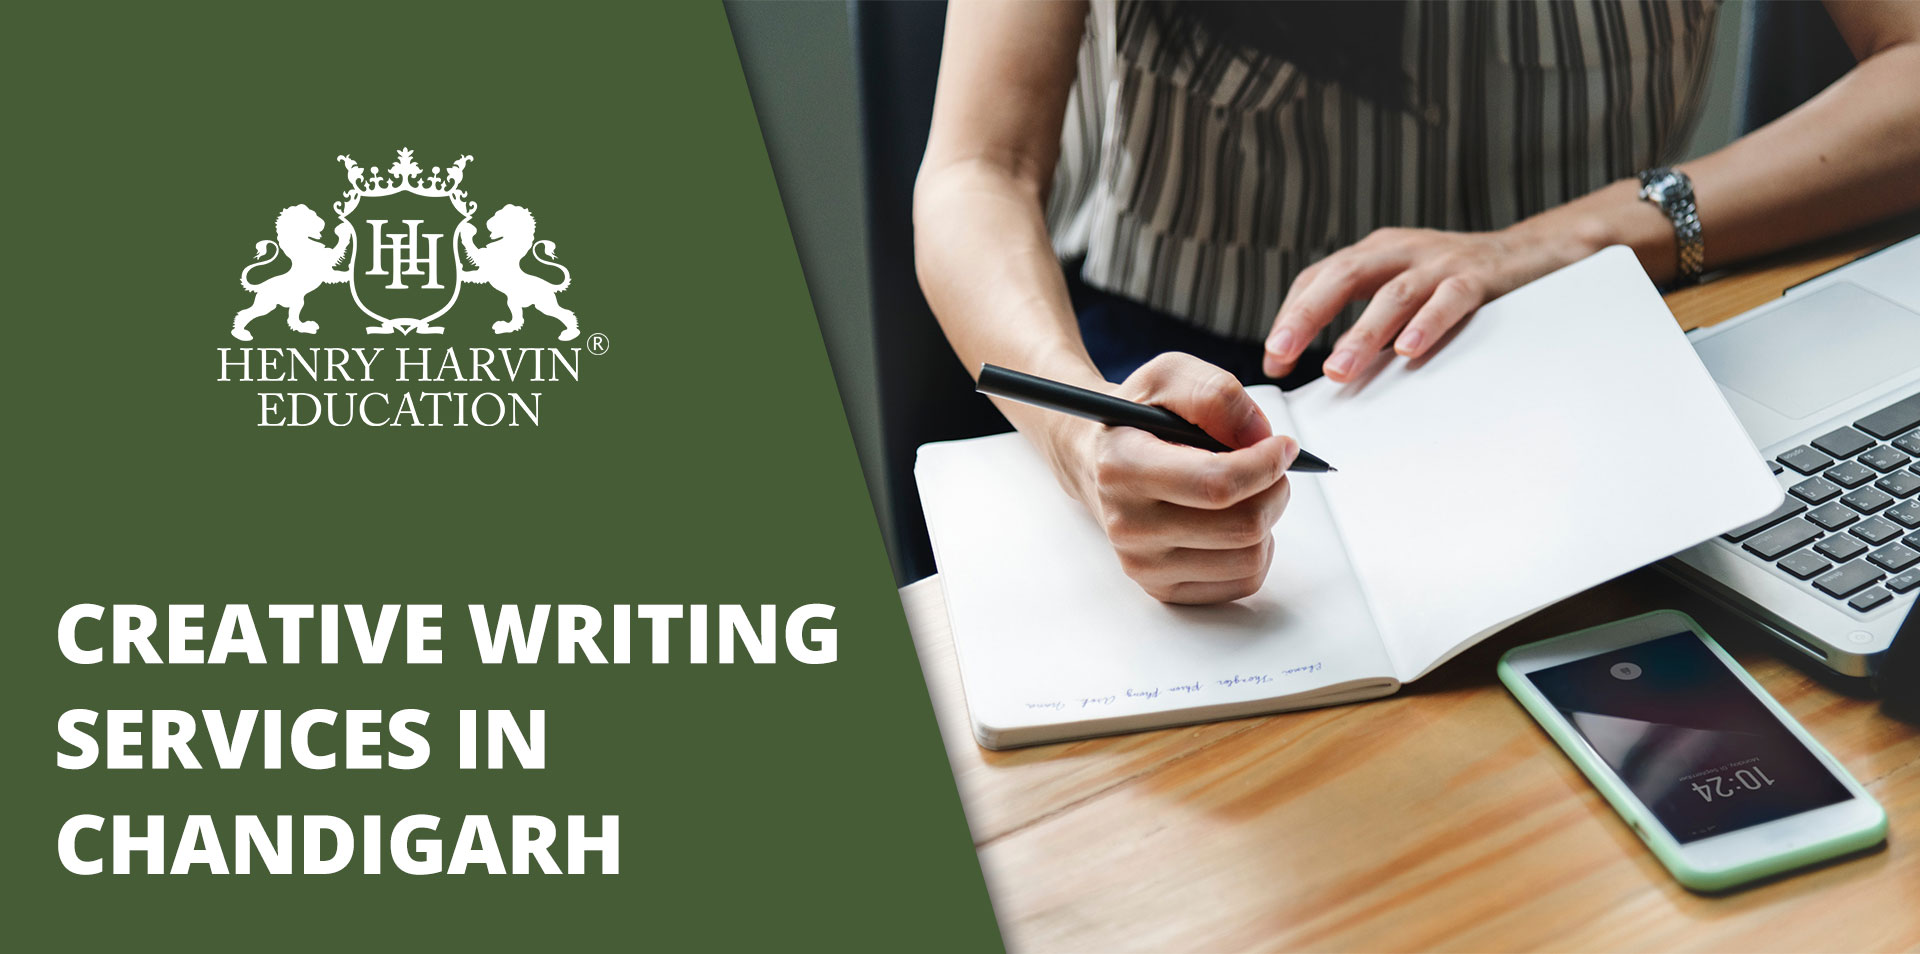 Content writing companies in chandigarh